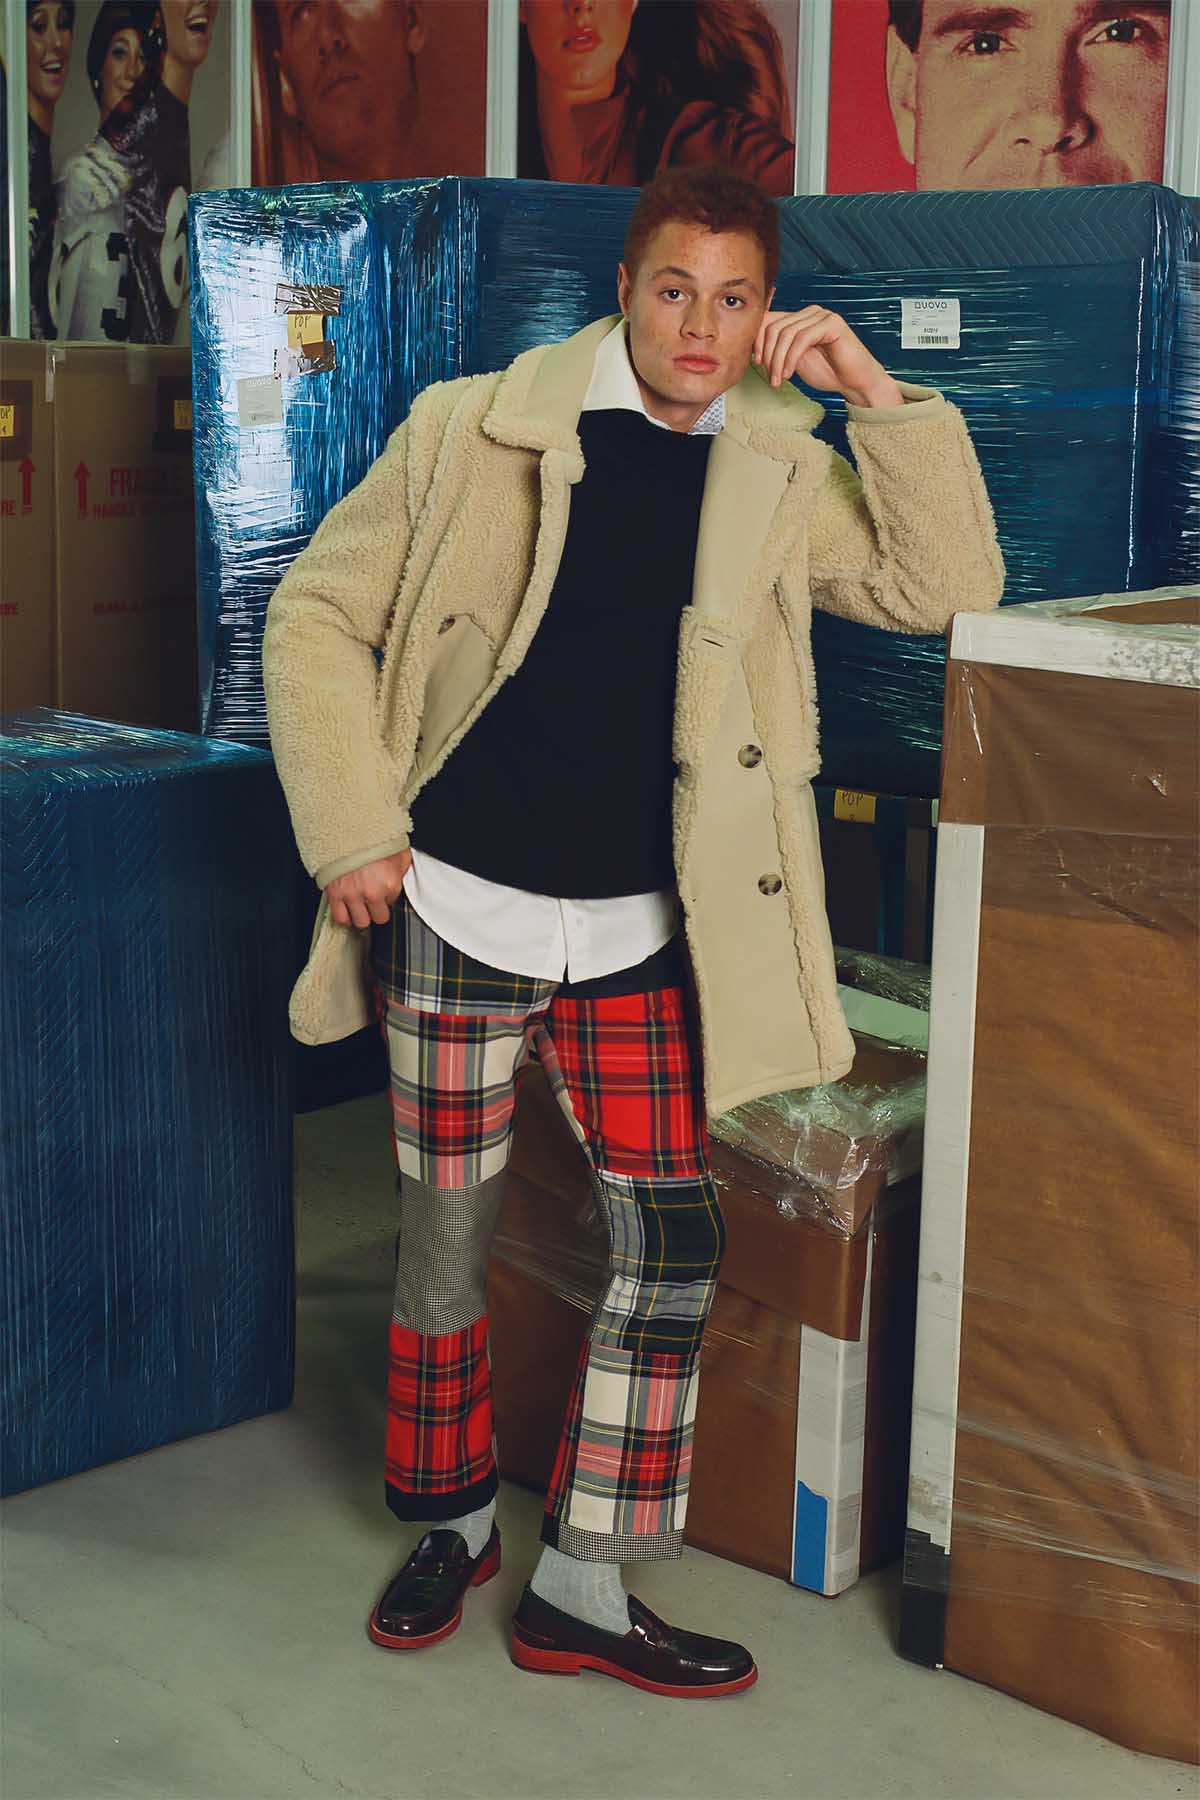 Hilfiger Collection Men’s Reversible Shearling Coat (Fall 2020), Tommy Hilfiger Men’s Shoal Sweater (Holiday 2003), Tommy Hilfiger Collection Men’s Cotton Pique Shirt (Fall 2008), Tommy Hilfiger Collection Men’s Flare Leg Tartan & Houndstooth Patchwork Pant (Fall 2000), Tommy Hilfiger Collection Men’s Loafers (Spring 2012)